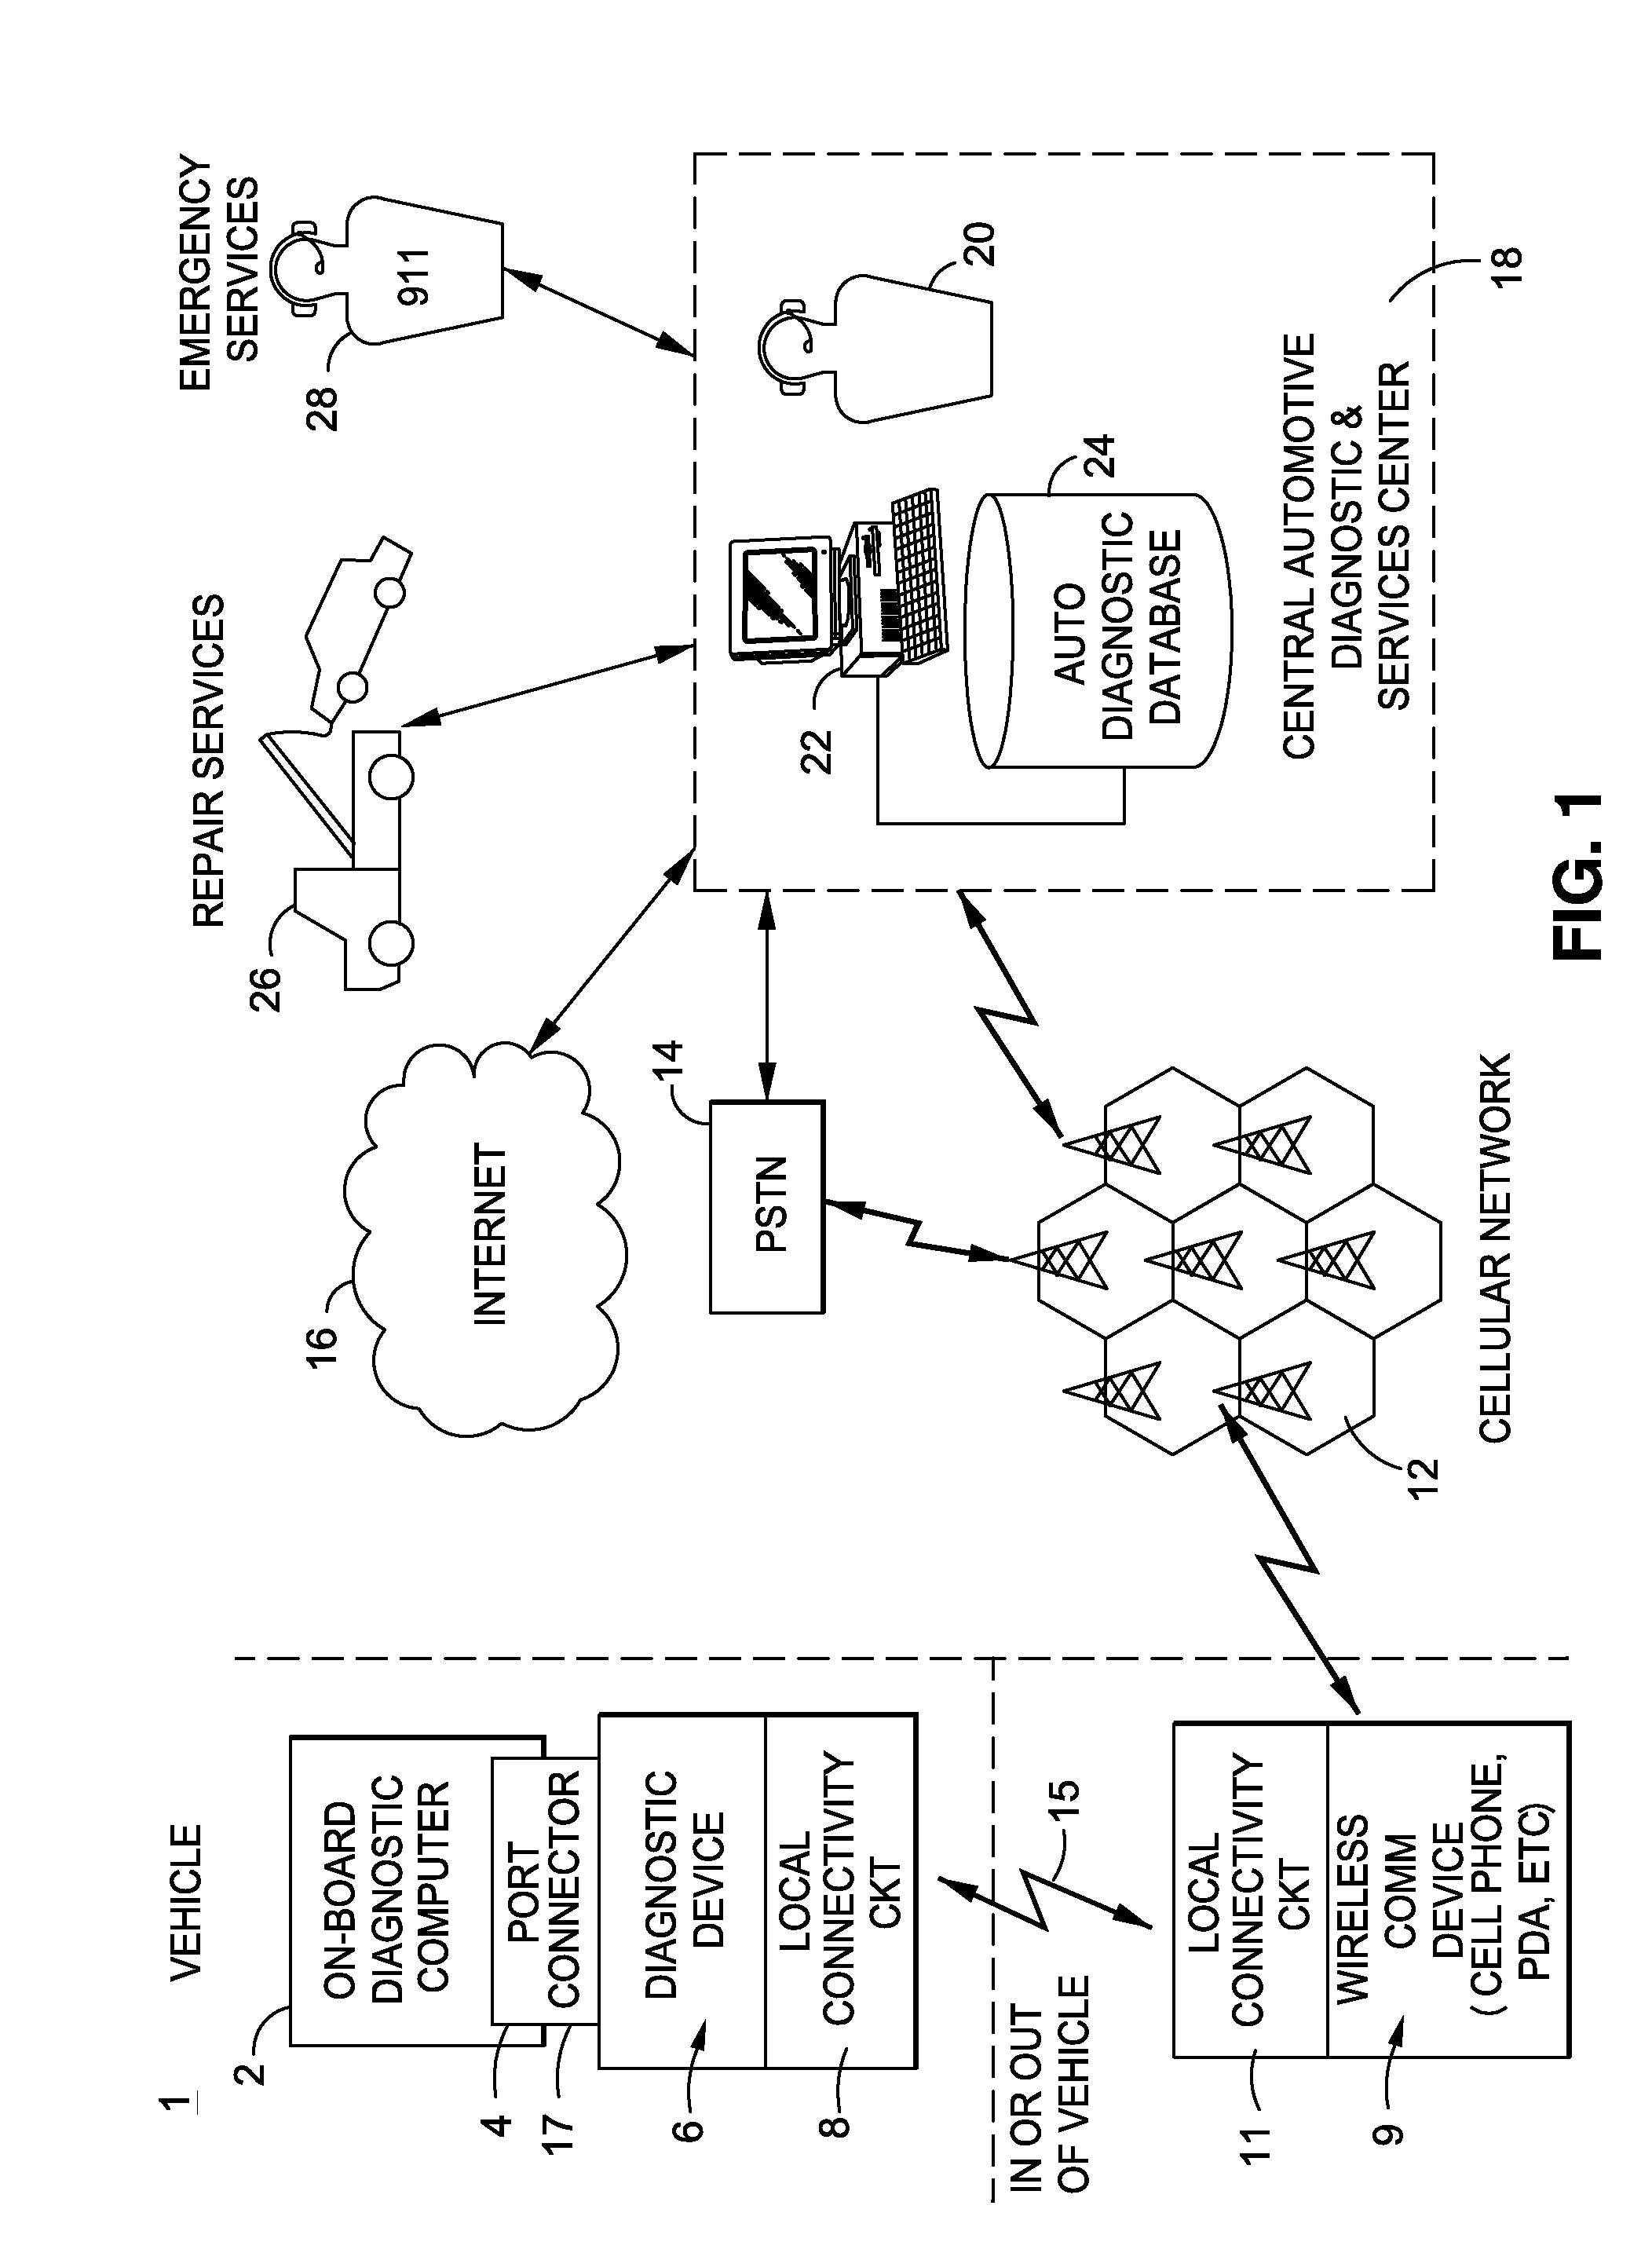 Mobile device based vehicle diagnostic system